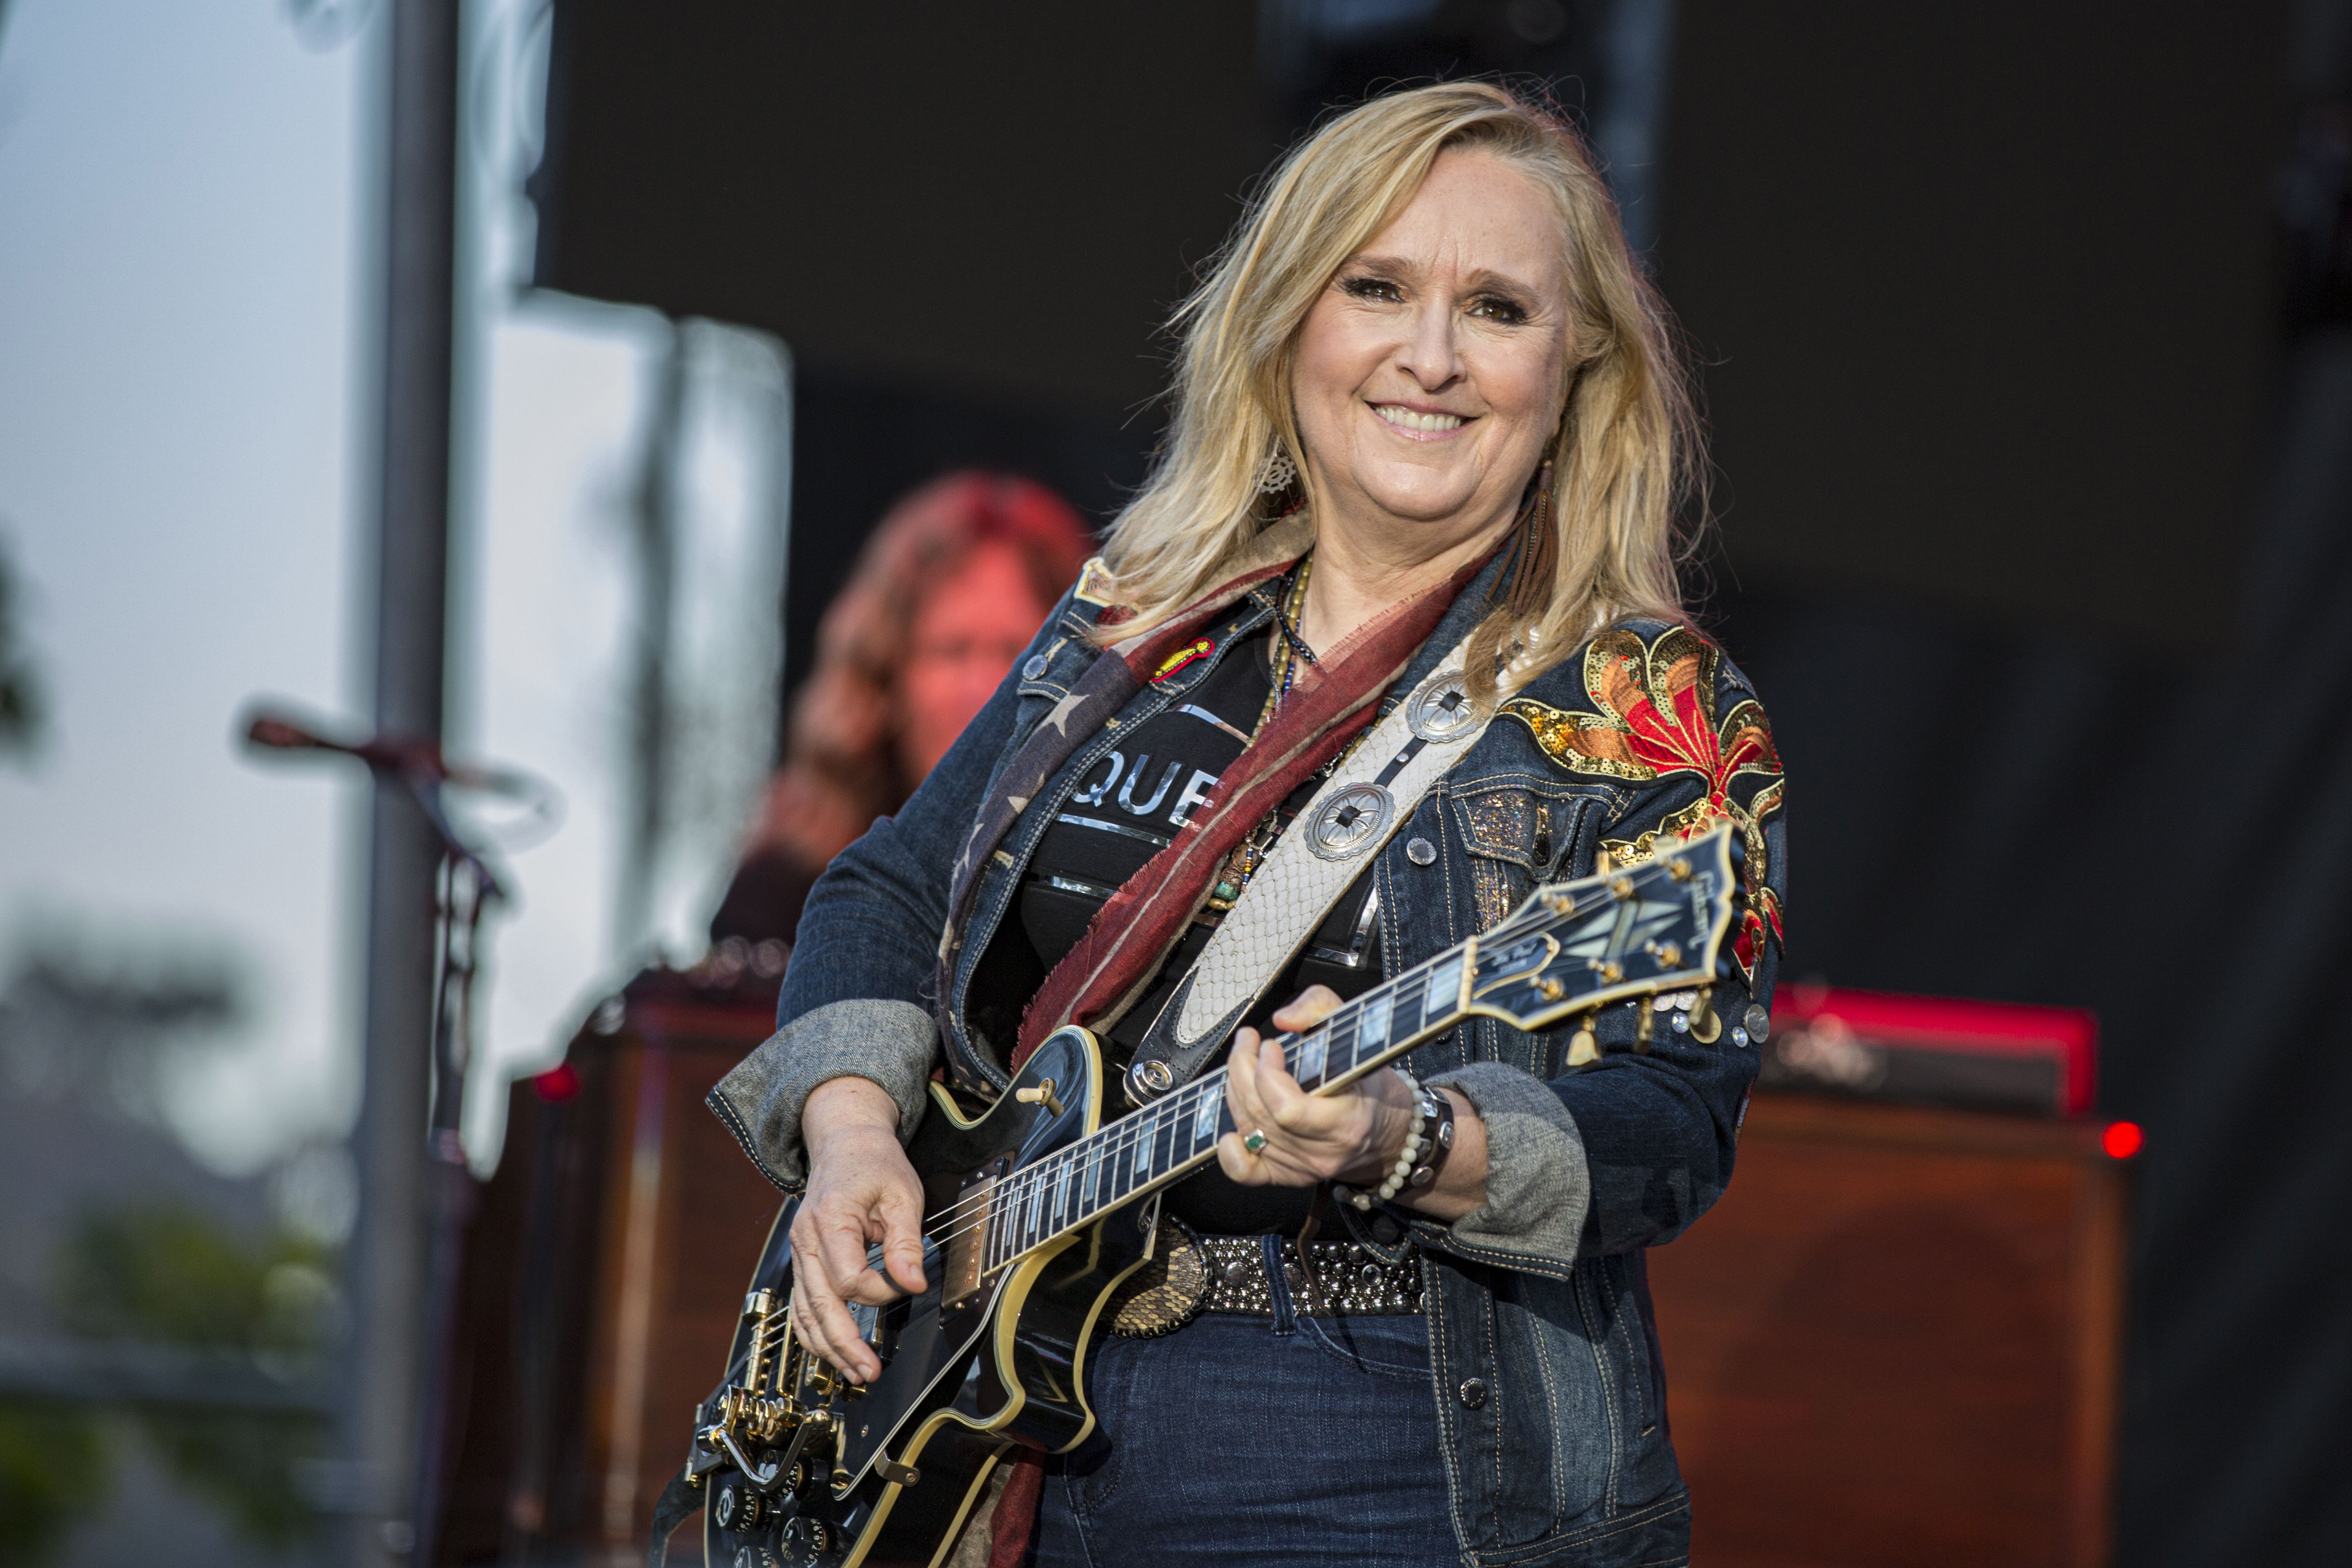 Melissa Etheridge performs on stage at San Diego Pride Festival 2019 on July 14, 2019 in San Diego, California. | Photo by Daniel Knighton/Getty Images